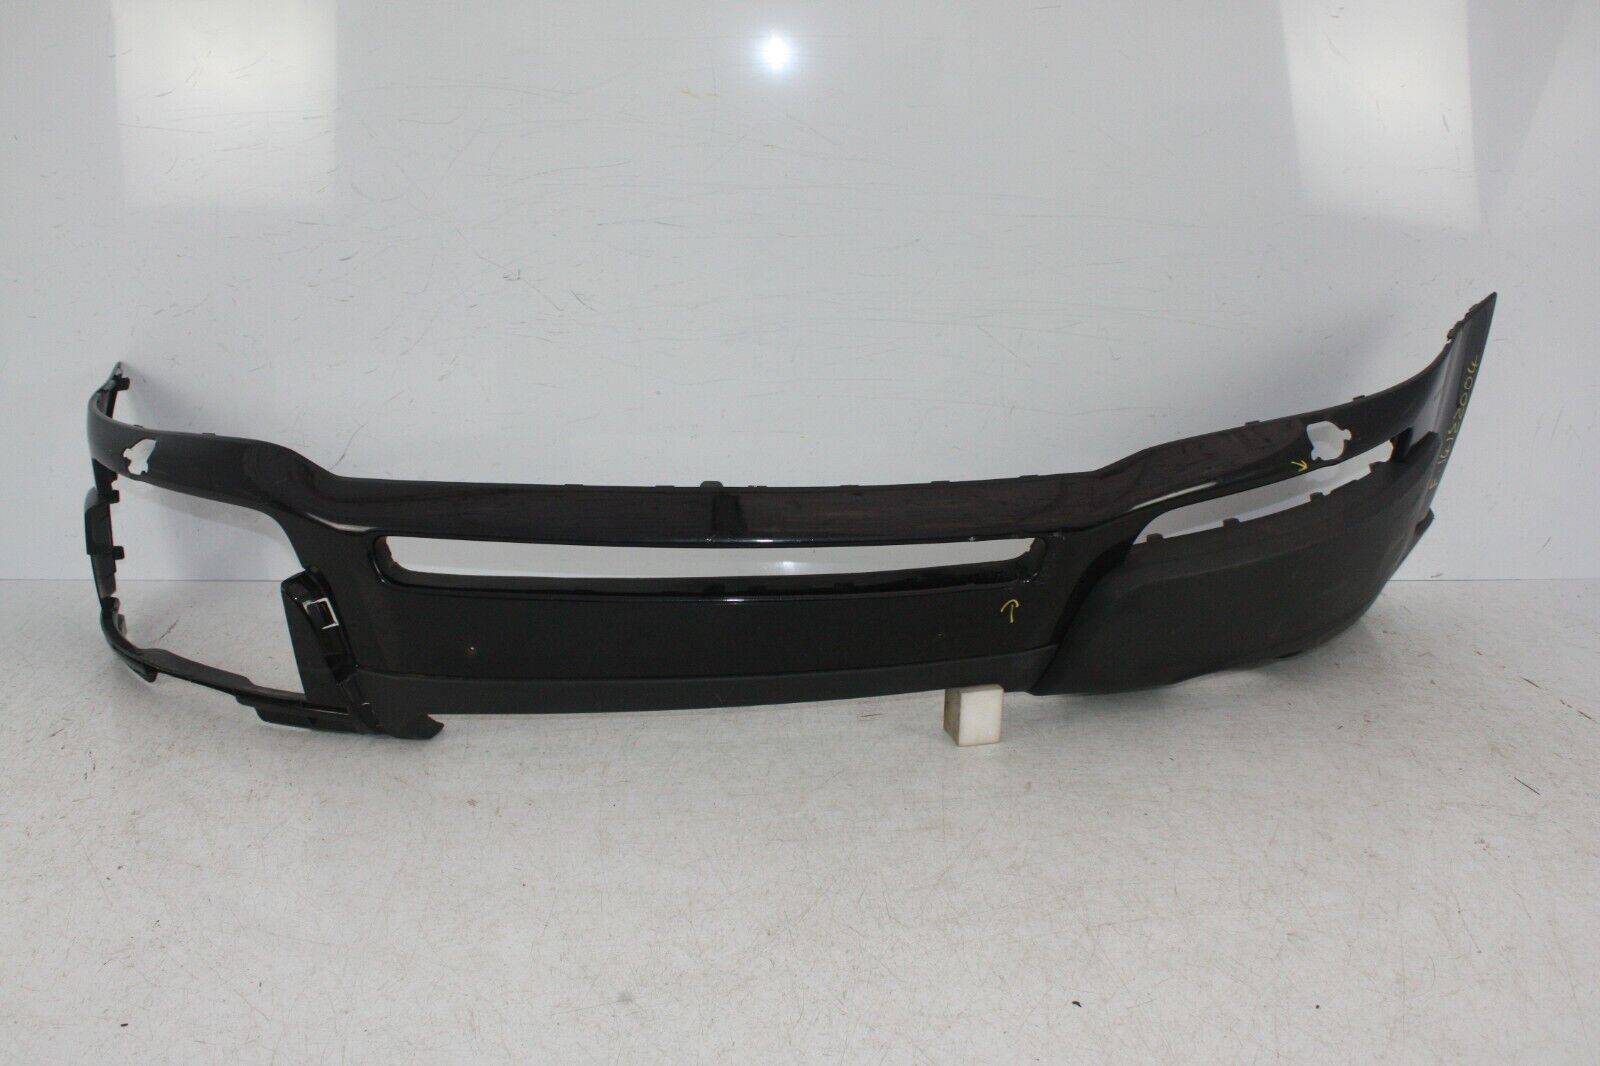 VOLVO-XC90-FRONT-BUMPER-2003-TO-2006-175367536977